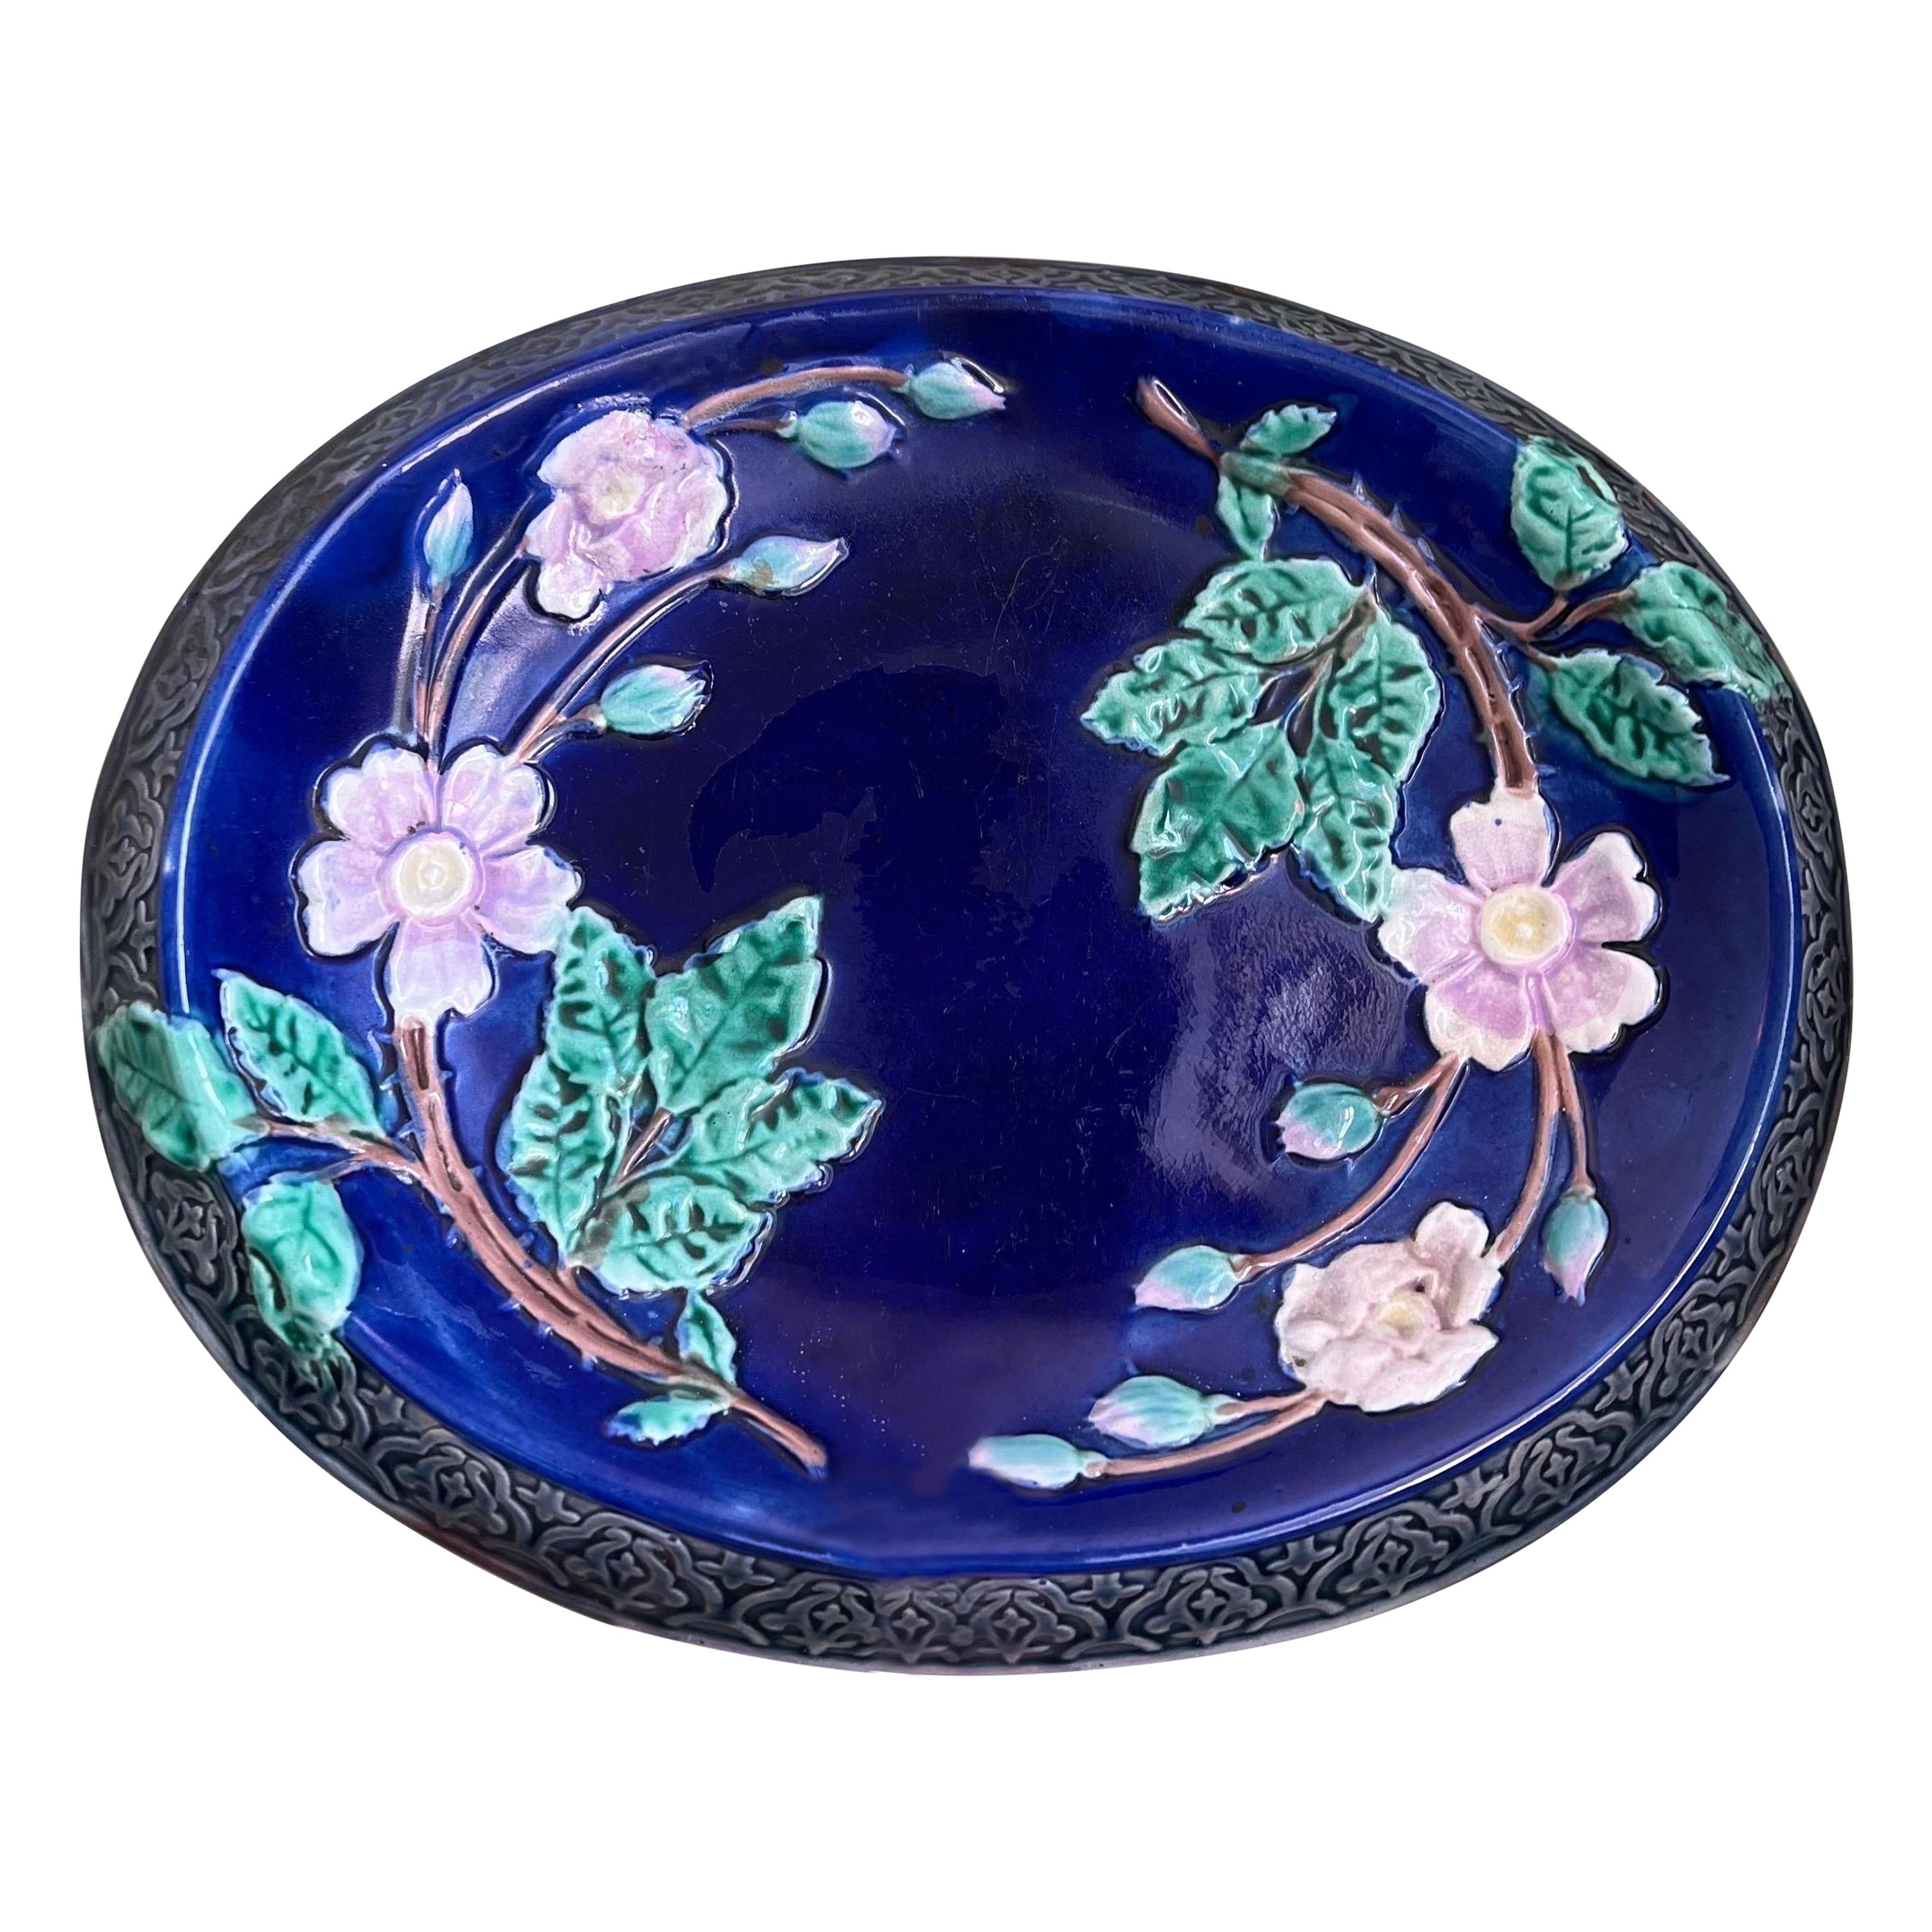 1880s Majolica Cobalt Blue Wild Rose Bread Bowl with Collector's Book